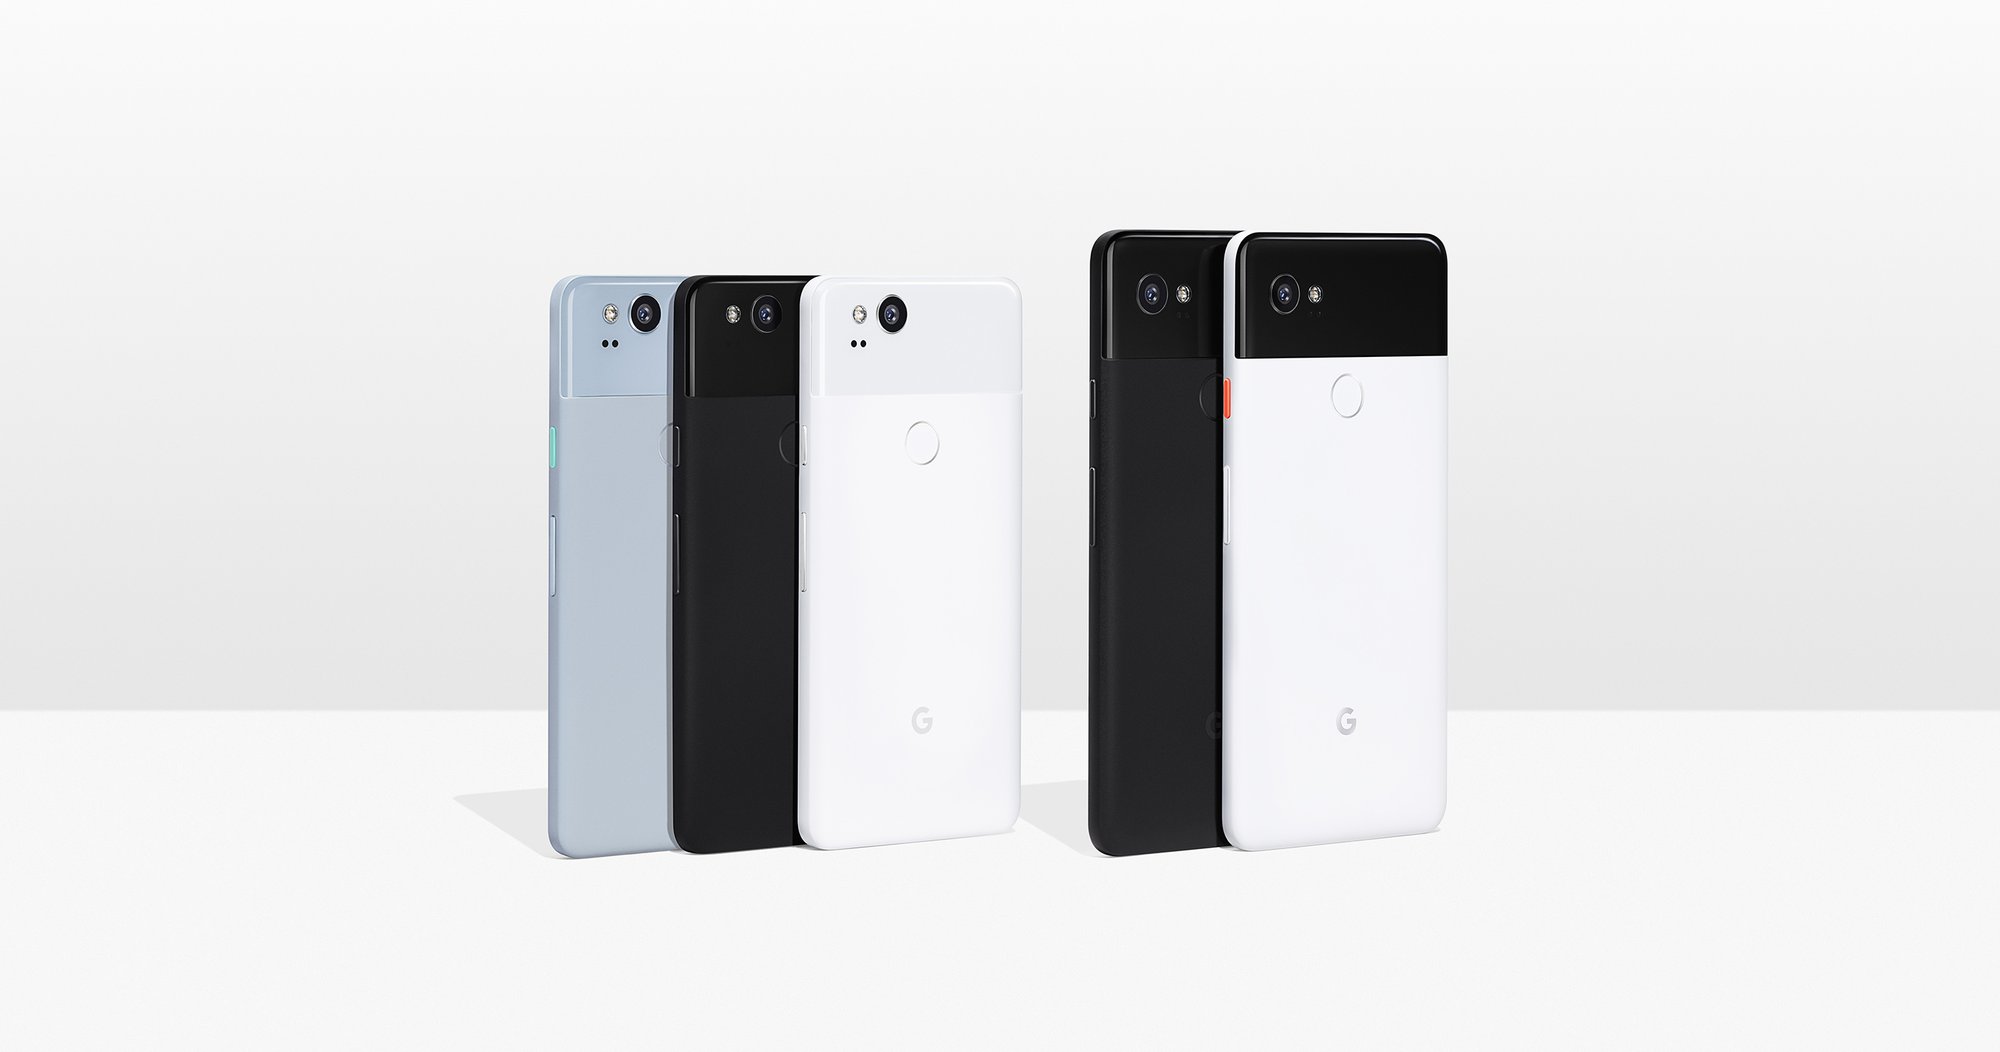 Google Pixel 2 and Pixel 2 XL Officially Announced